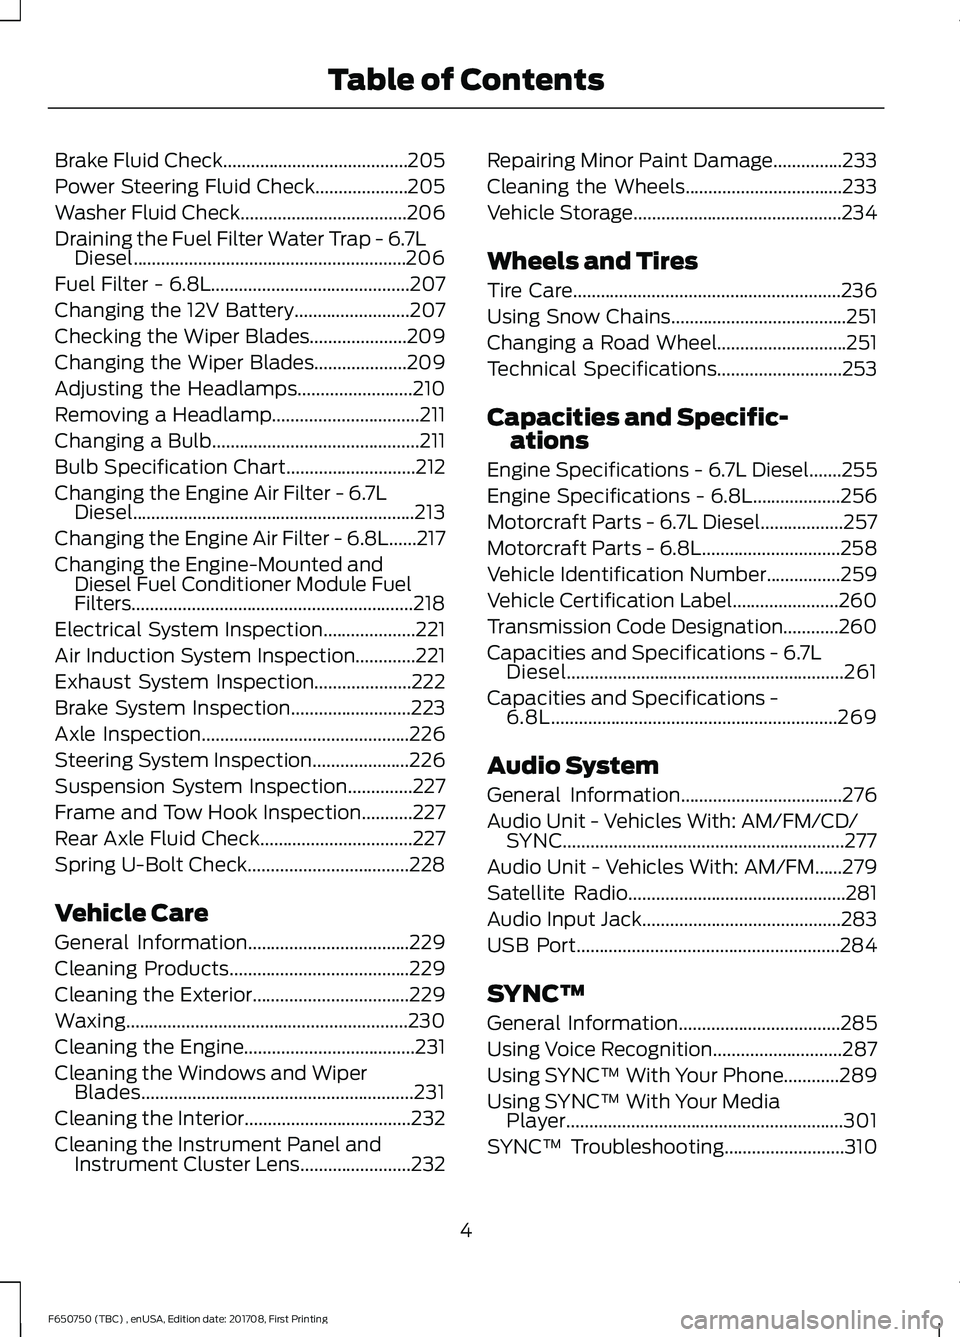 FORD F-650/750 2018  Owners Manual Brake Fluid Check........................................205
Power Steering Fluid Check....................205
Washer Fluid Check....................................206
Draining the Fuel Filter Water 